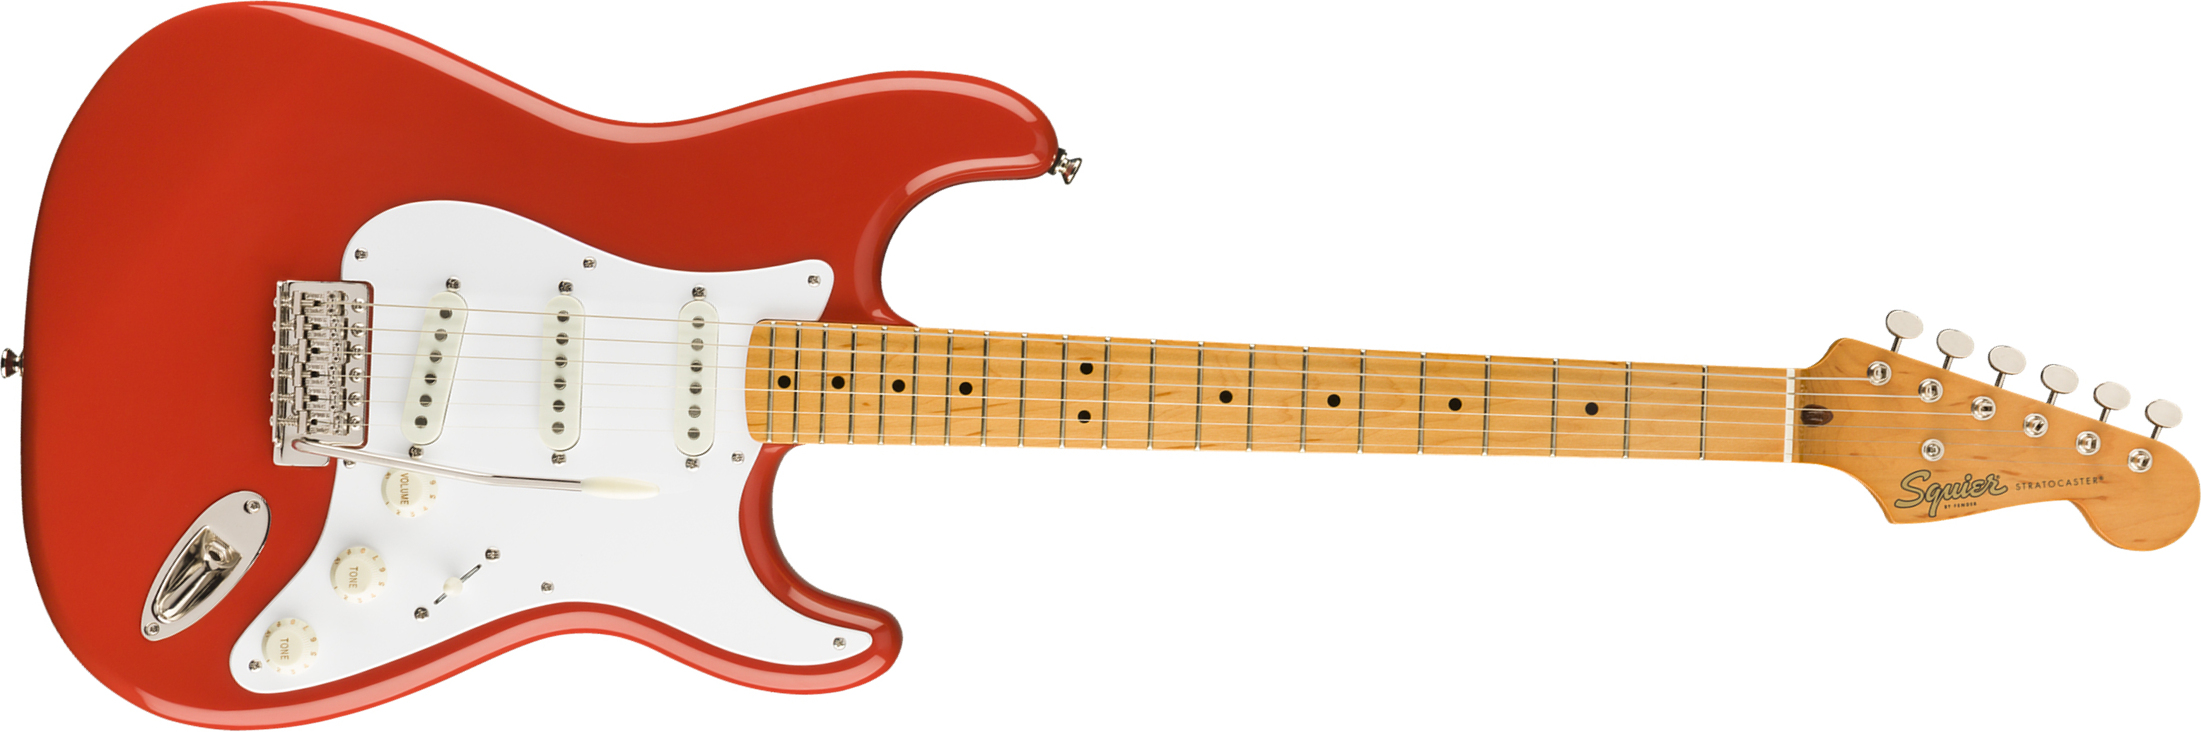 Squier Strat '50s Classic Vibe 2019 Mn 2019 - Fiesta Red - Str shape electric guitar - Main picture